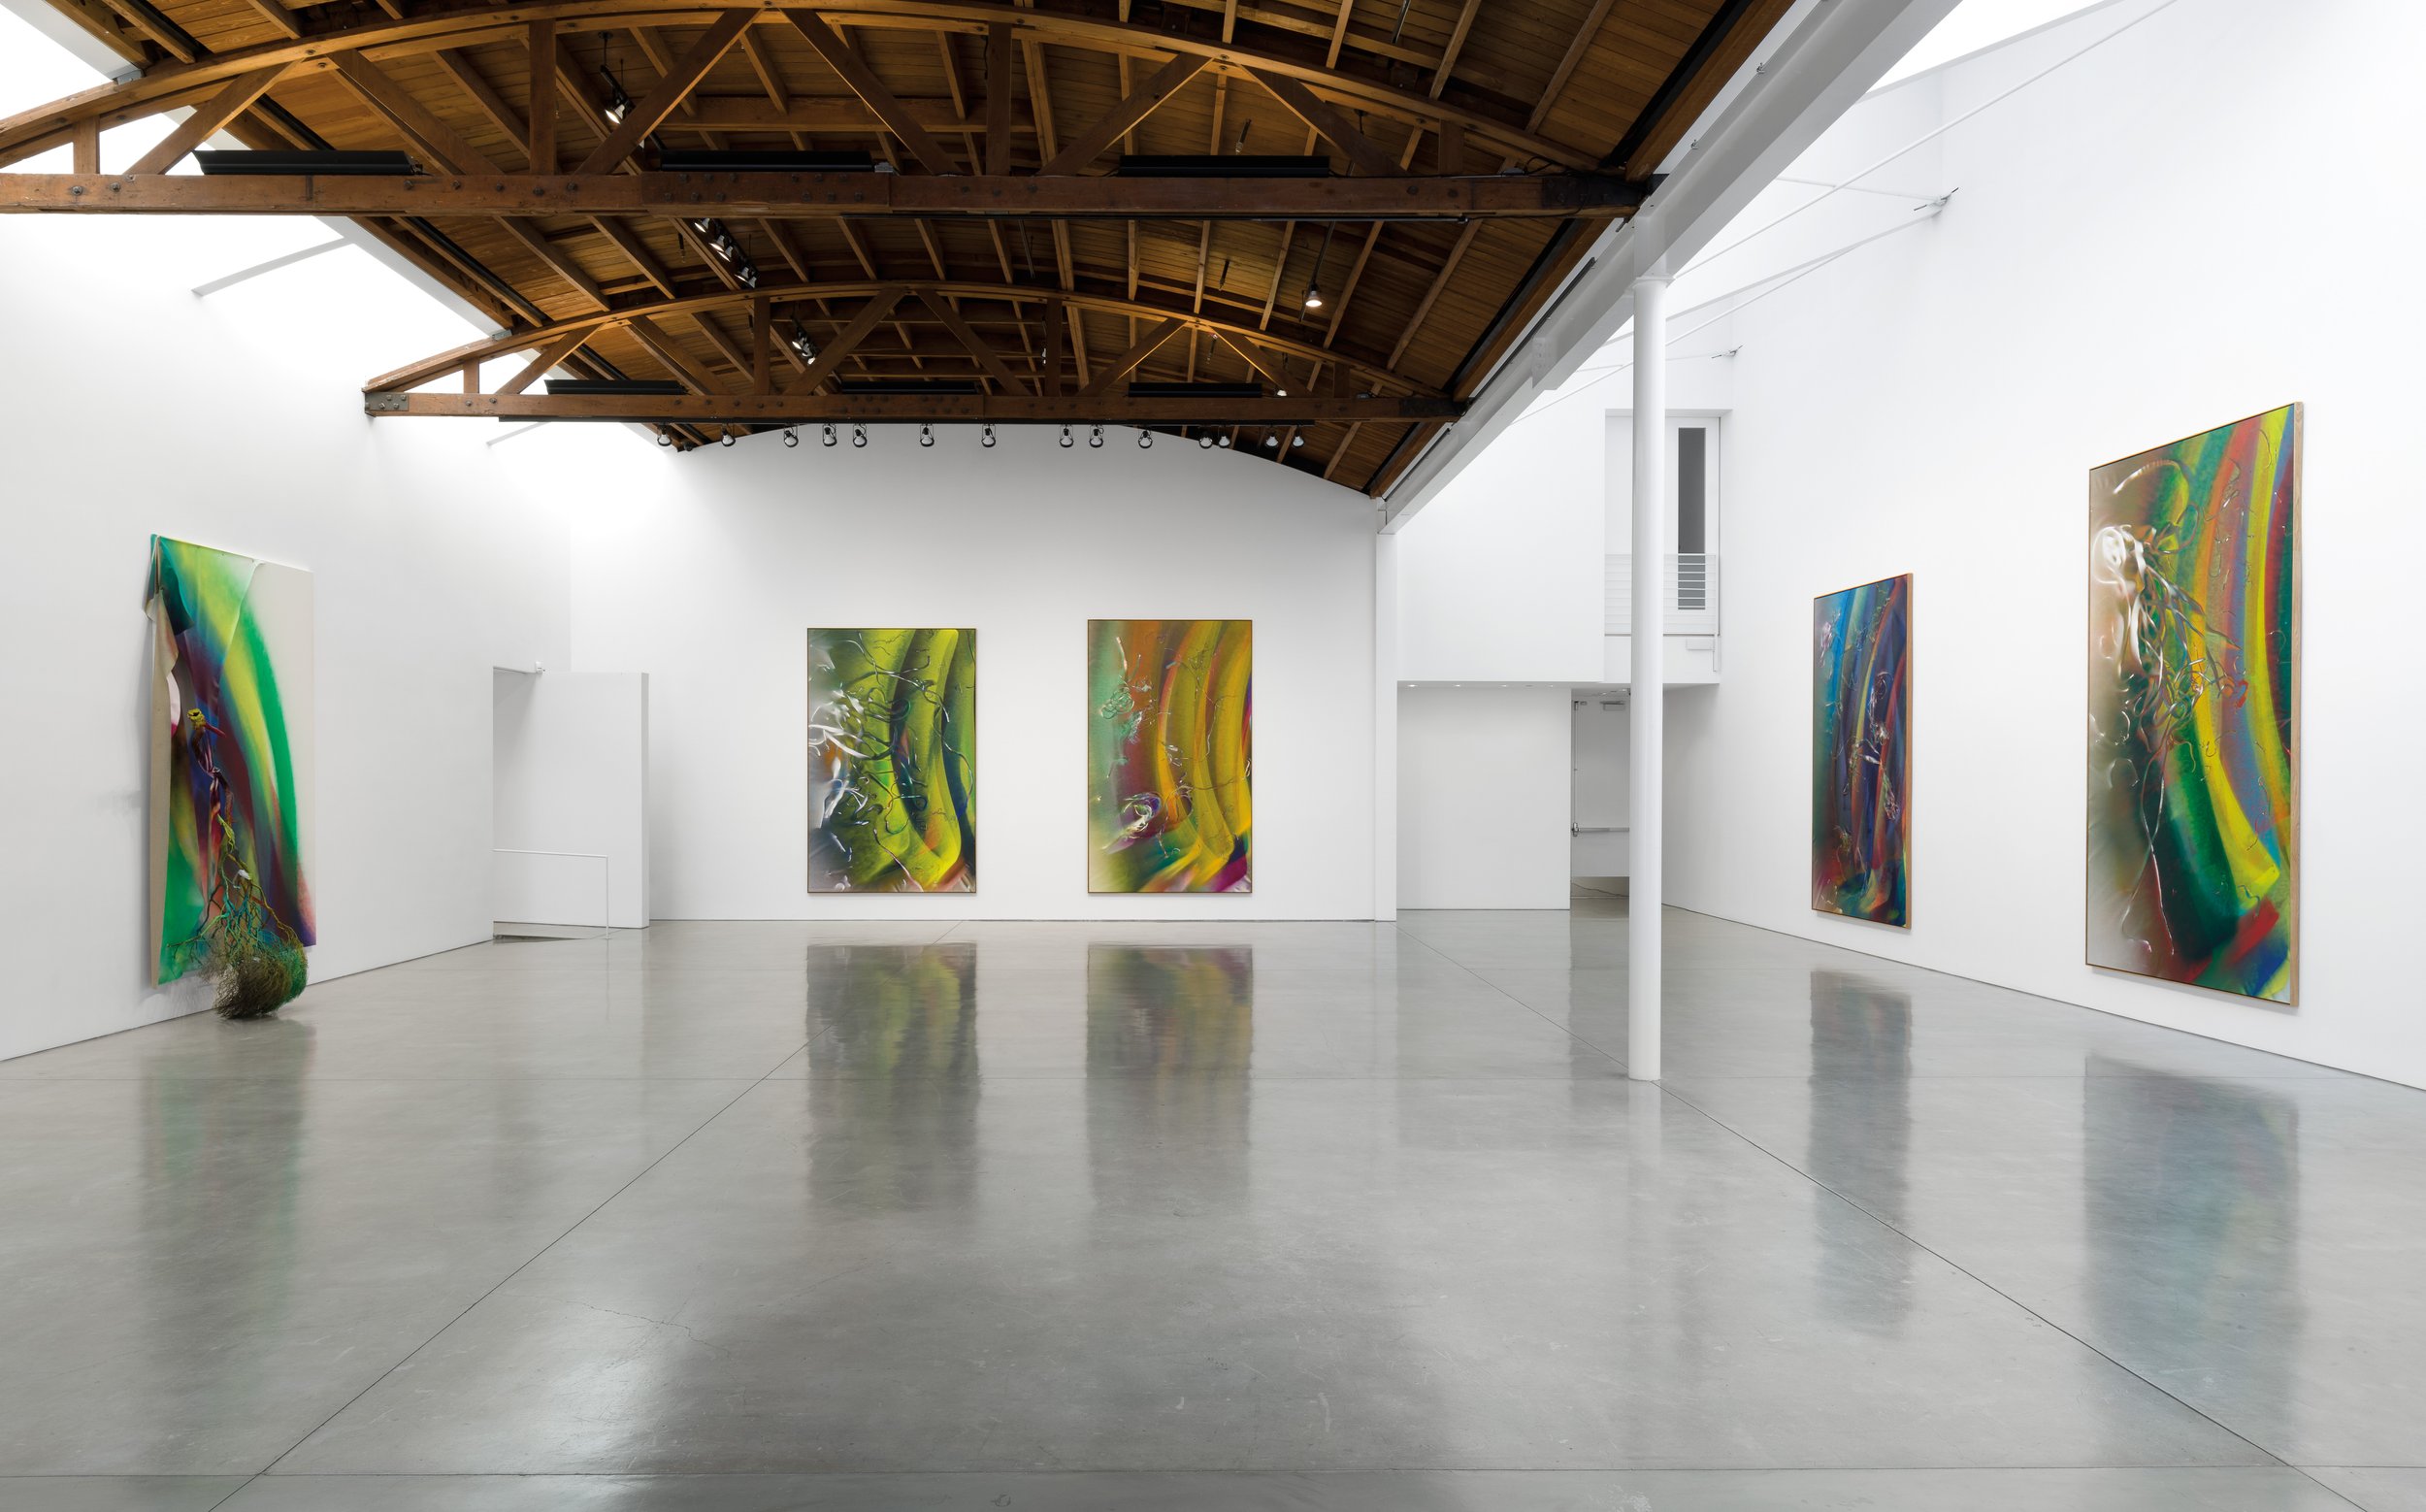  Katharina Grosse,  Repetitions without Origin , installation view, 2021 © Katharina Grosse and VG Bild-Kunst, Bonn, photo by Jeff McLane, courtesy of the artist and Gagosian 